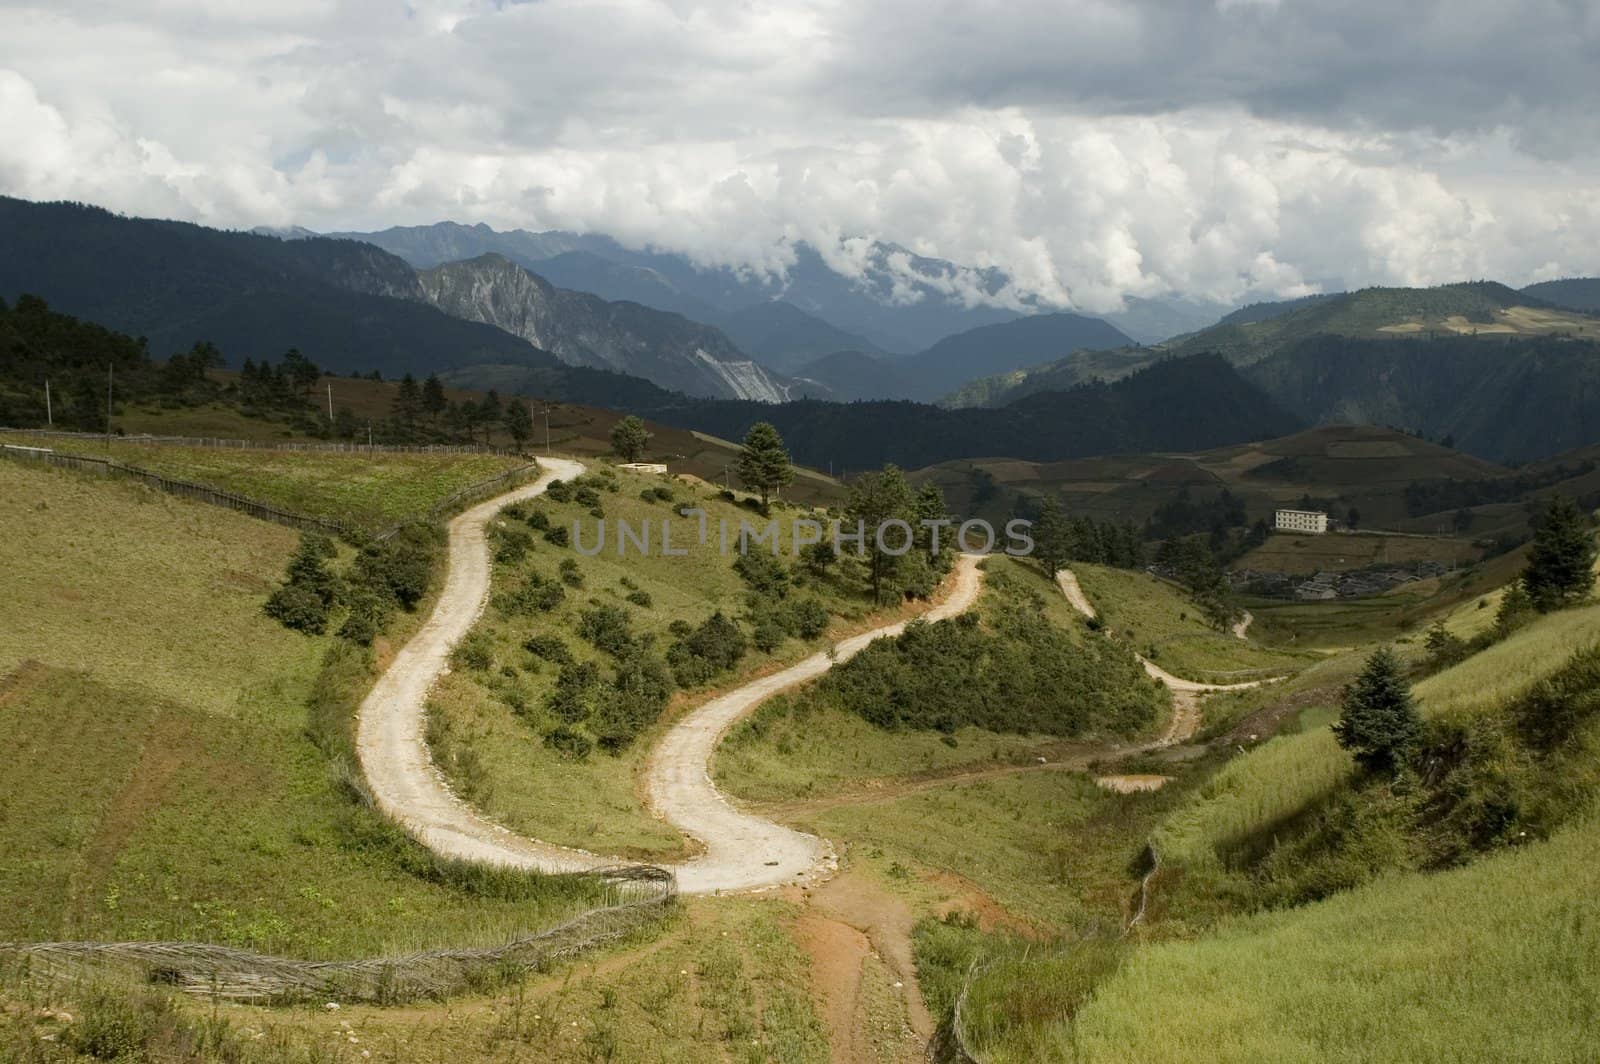 Yunnan province, China - beautiful landscape - roads, trees, meadows and high mountains surrounding village.